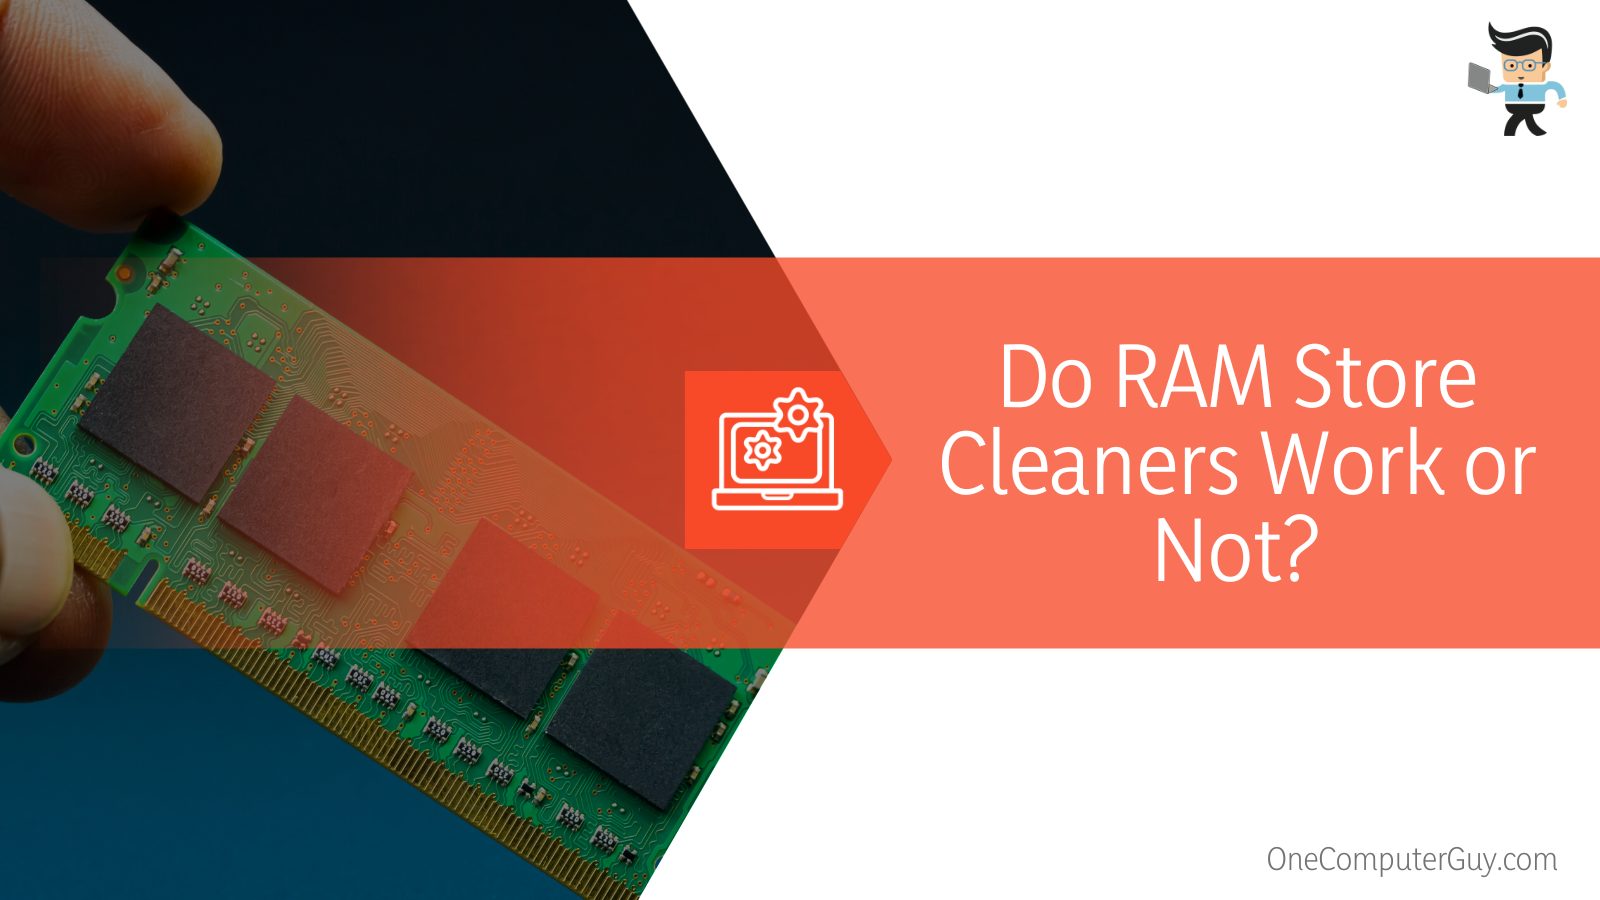 Do RAM Store Cleaners Work or Not